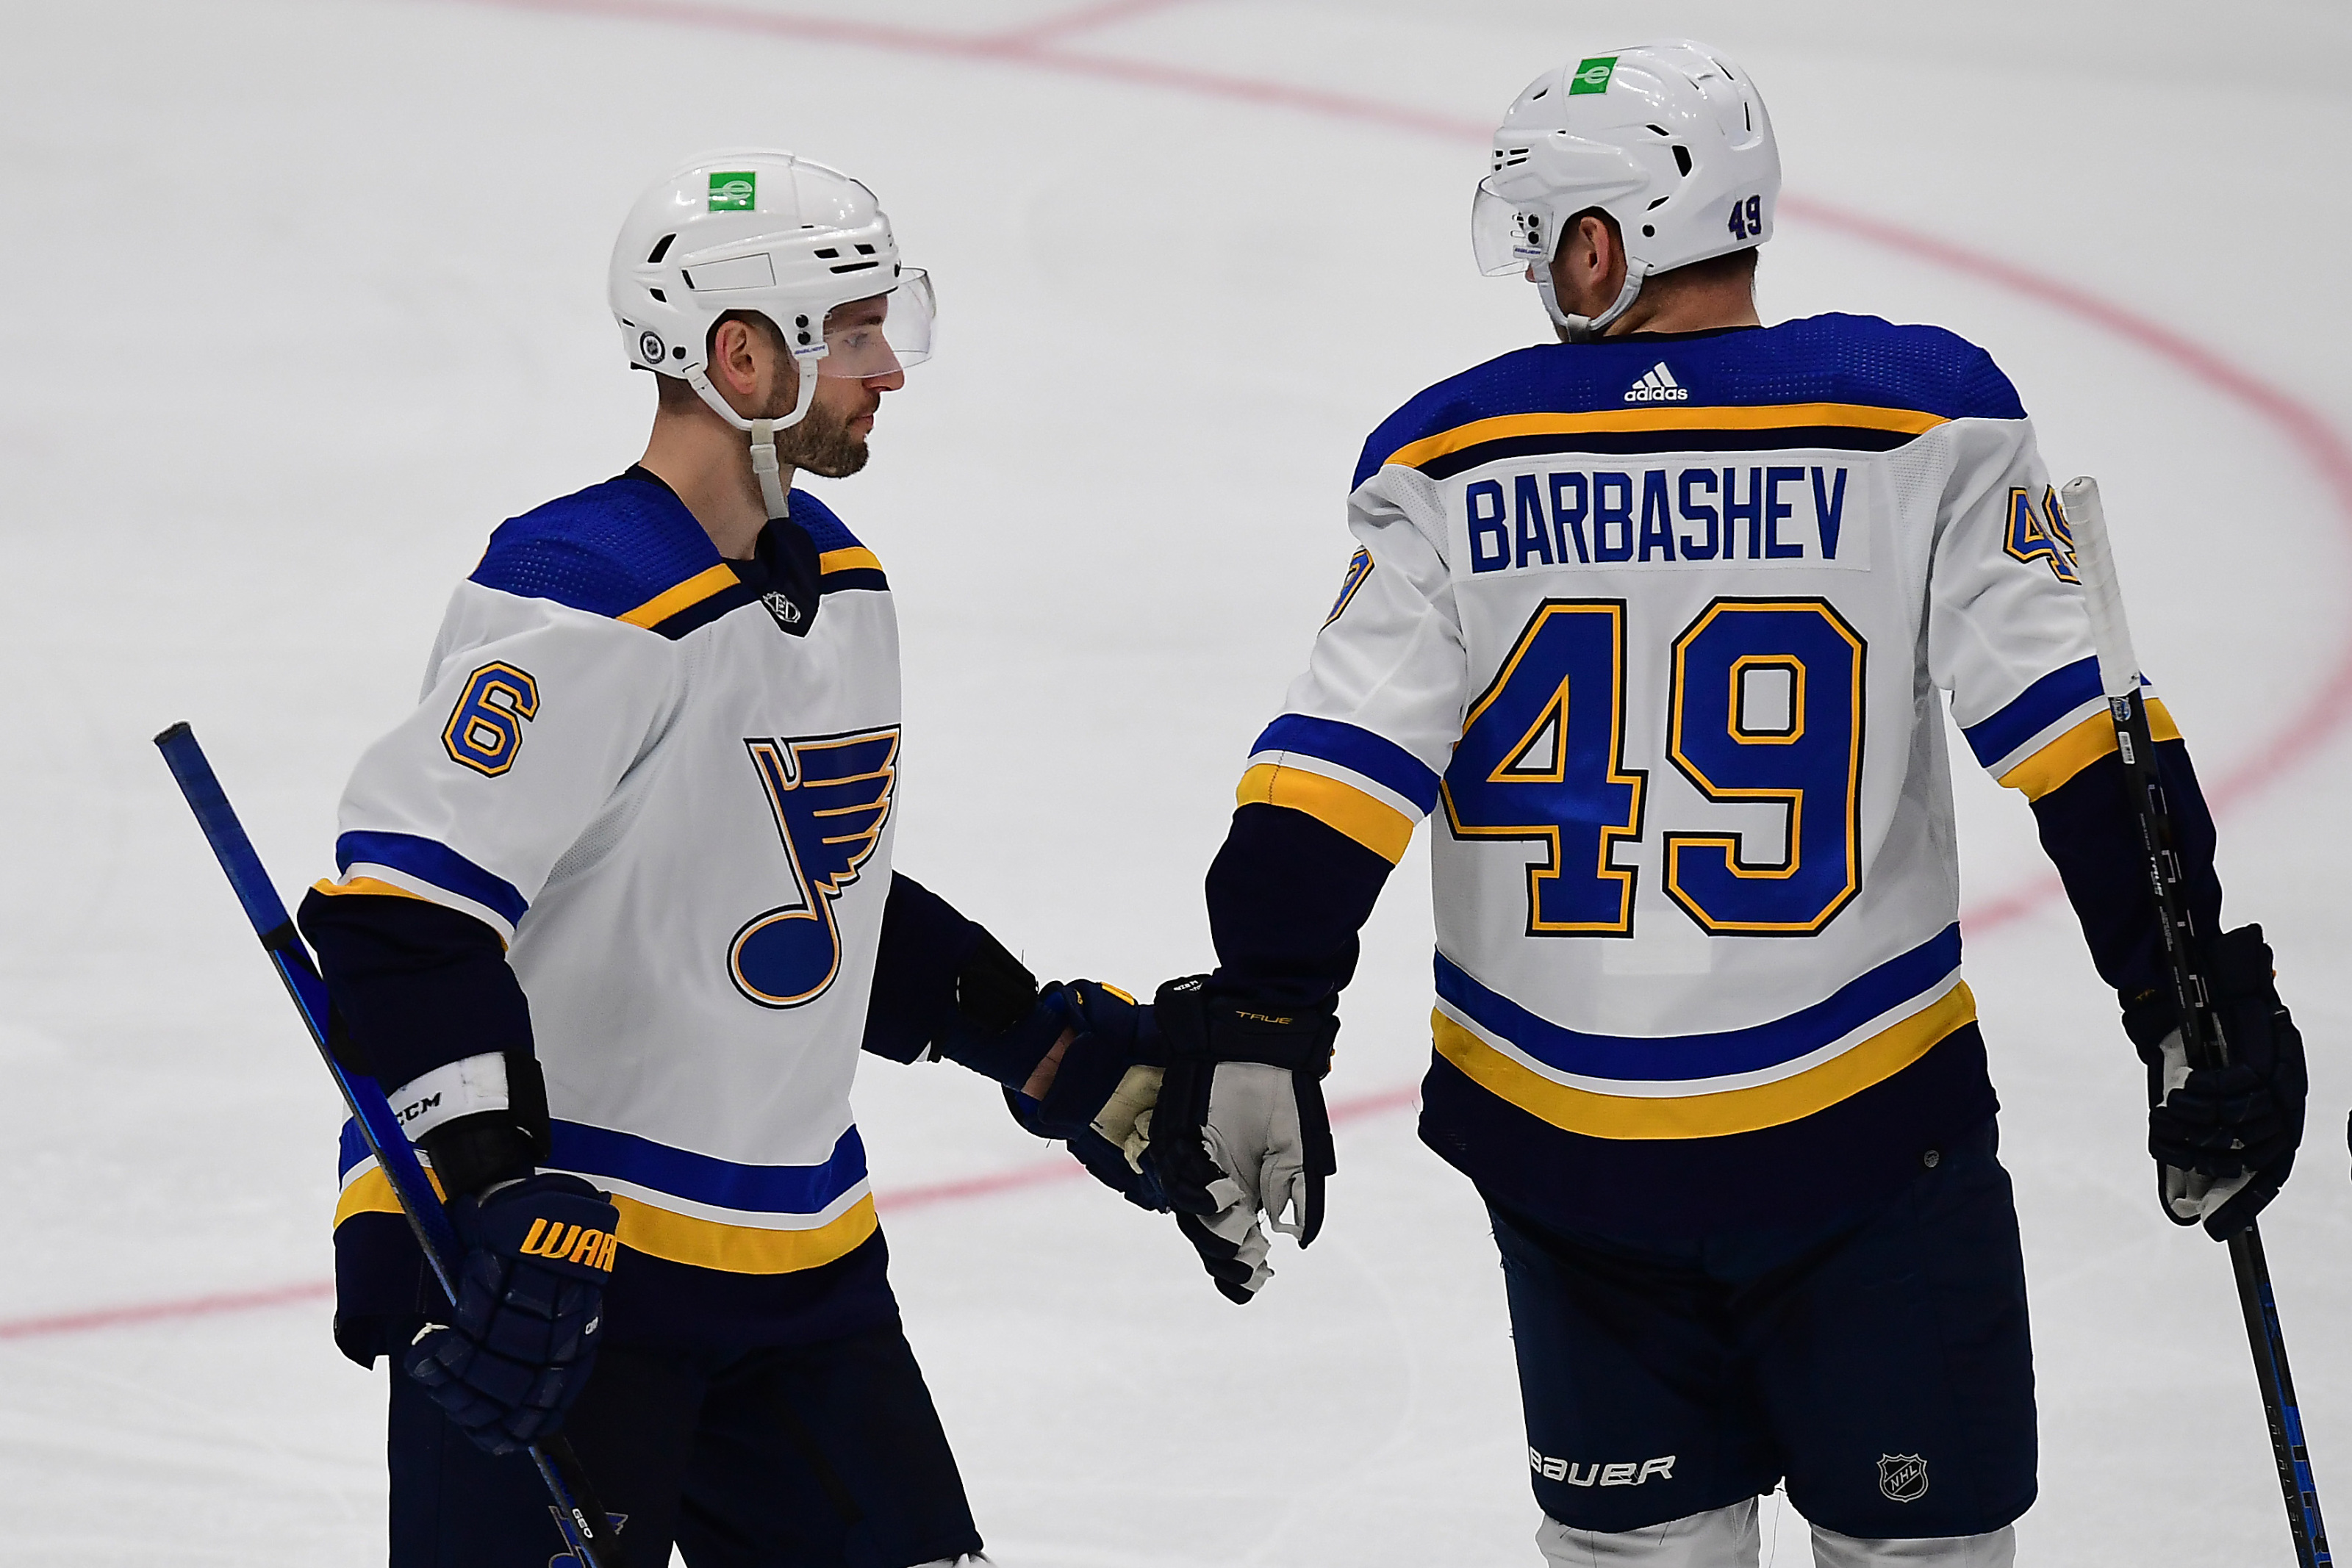 Ivan Barbashev may return Friday - St. Louis Game Time